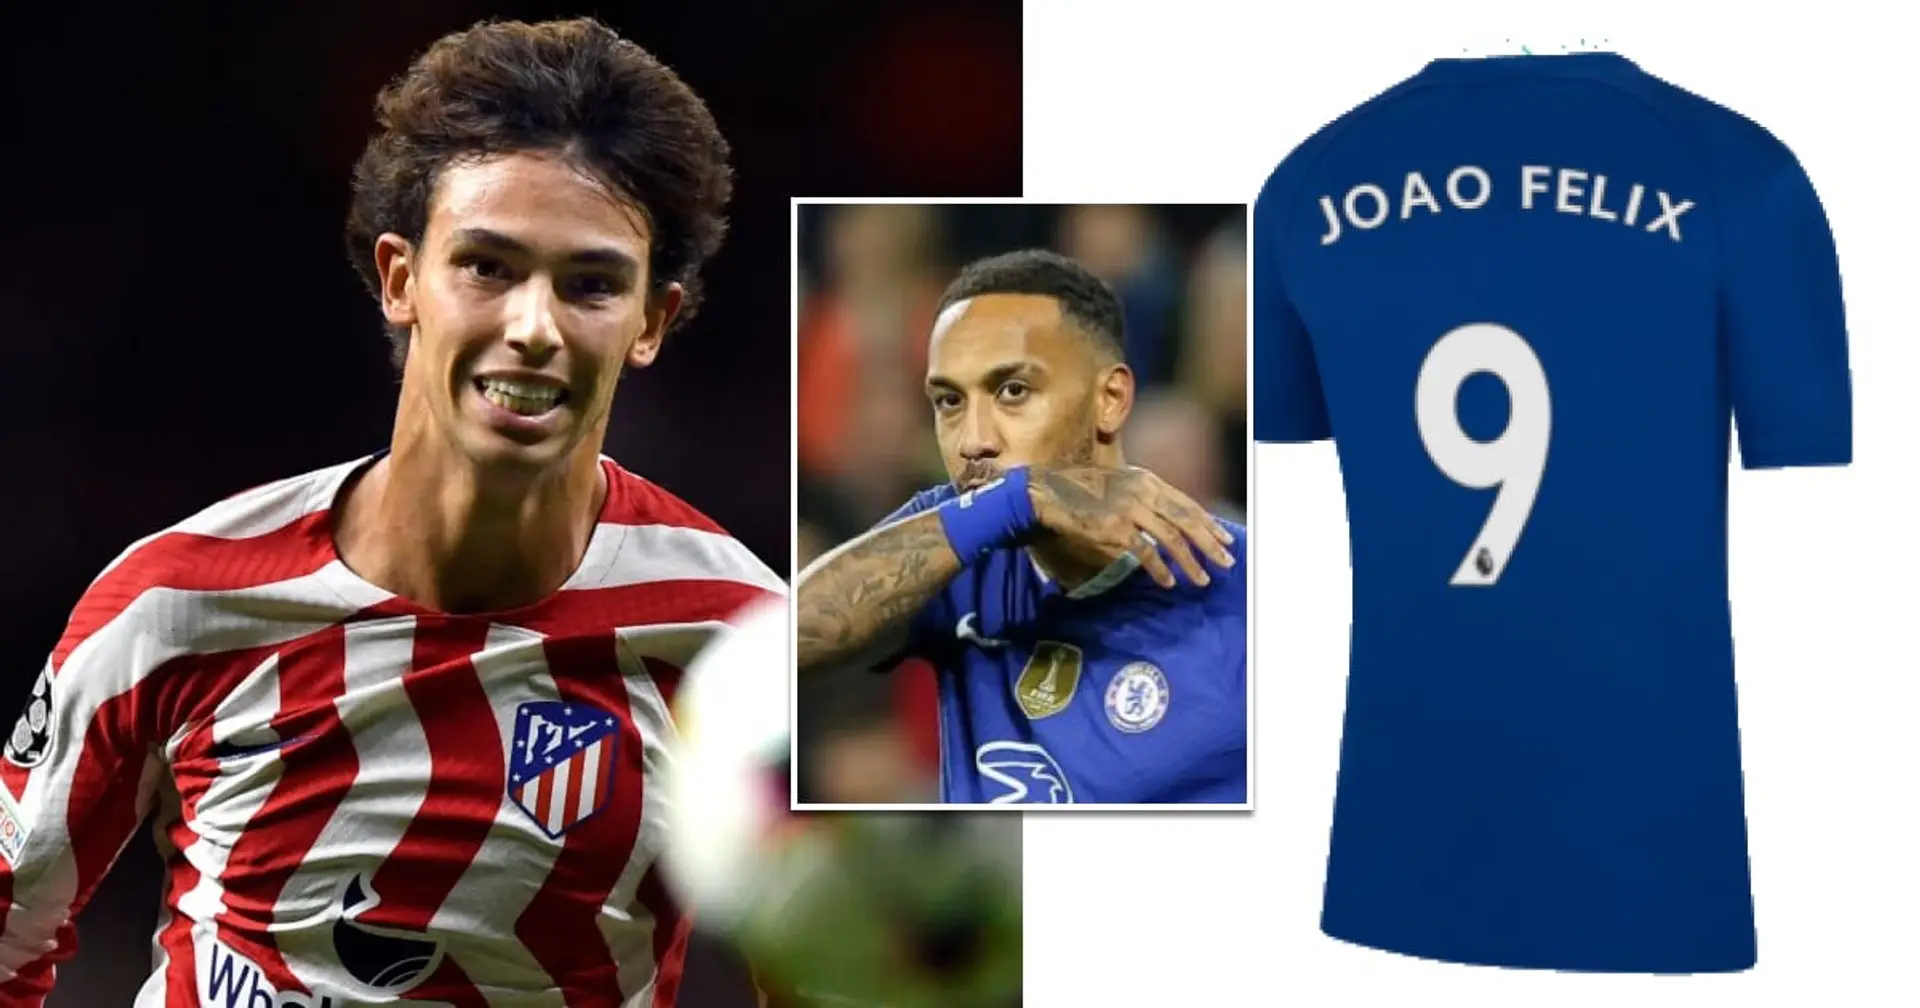 3 shirt numbers Chelsea could offer Joao Felix - one is very unusual